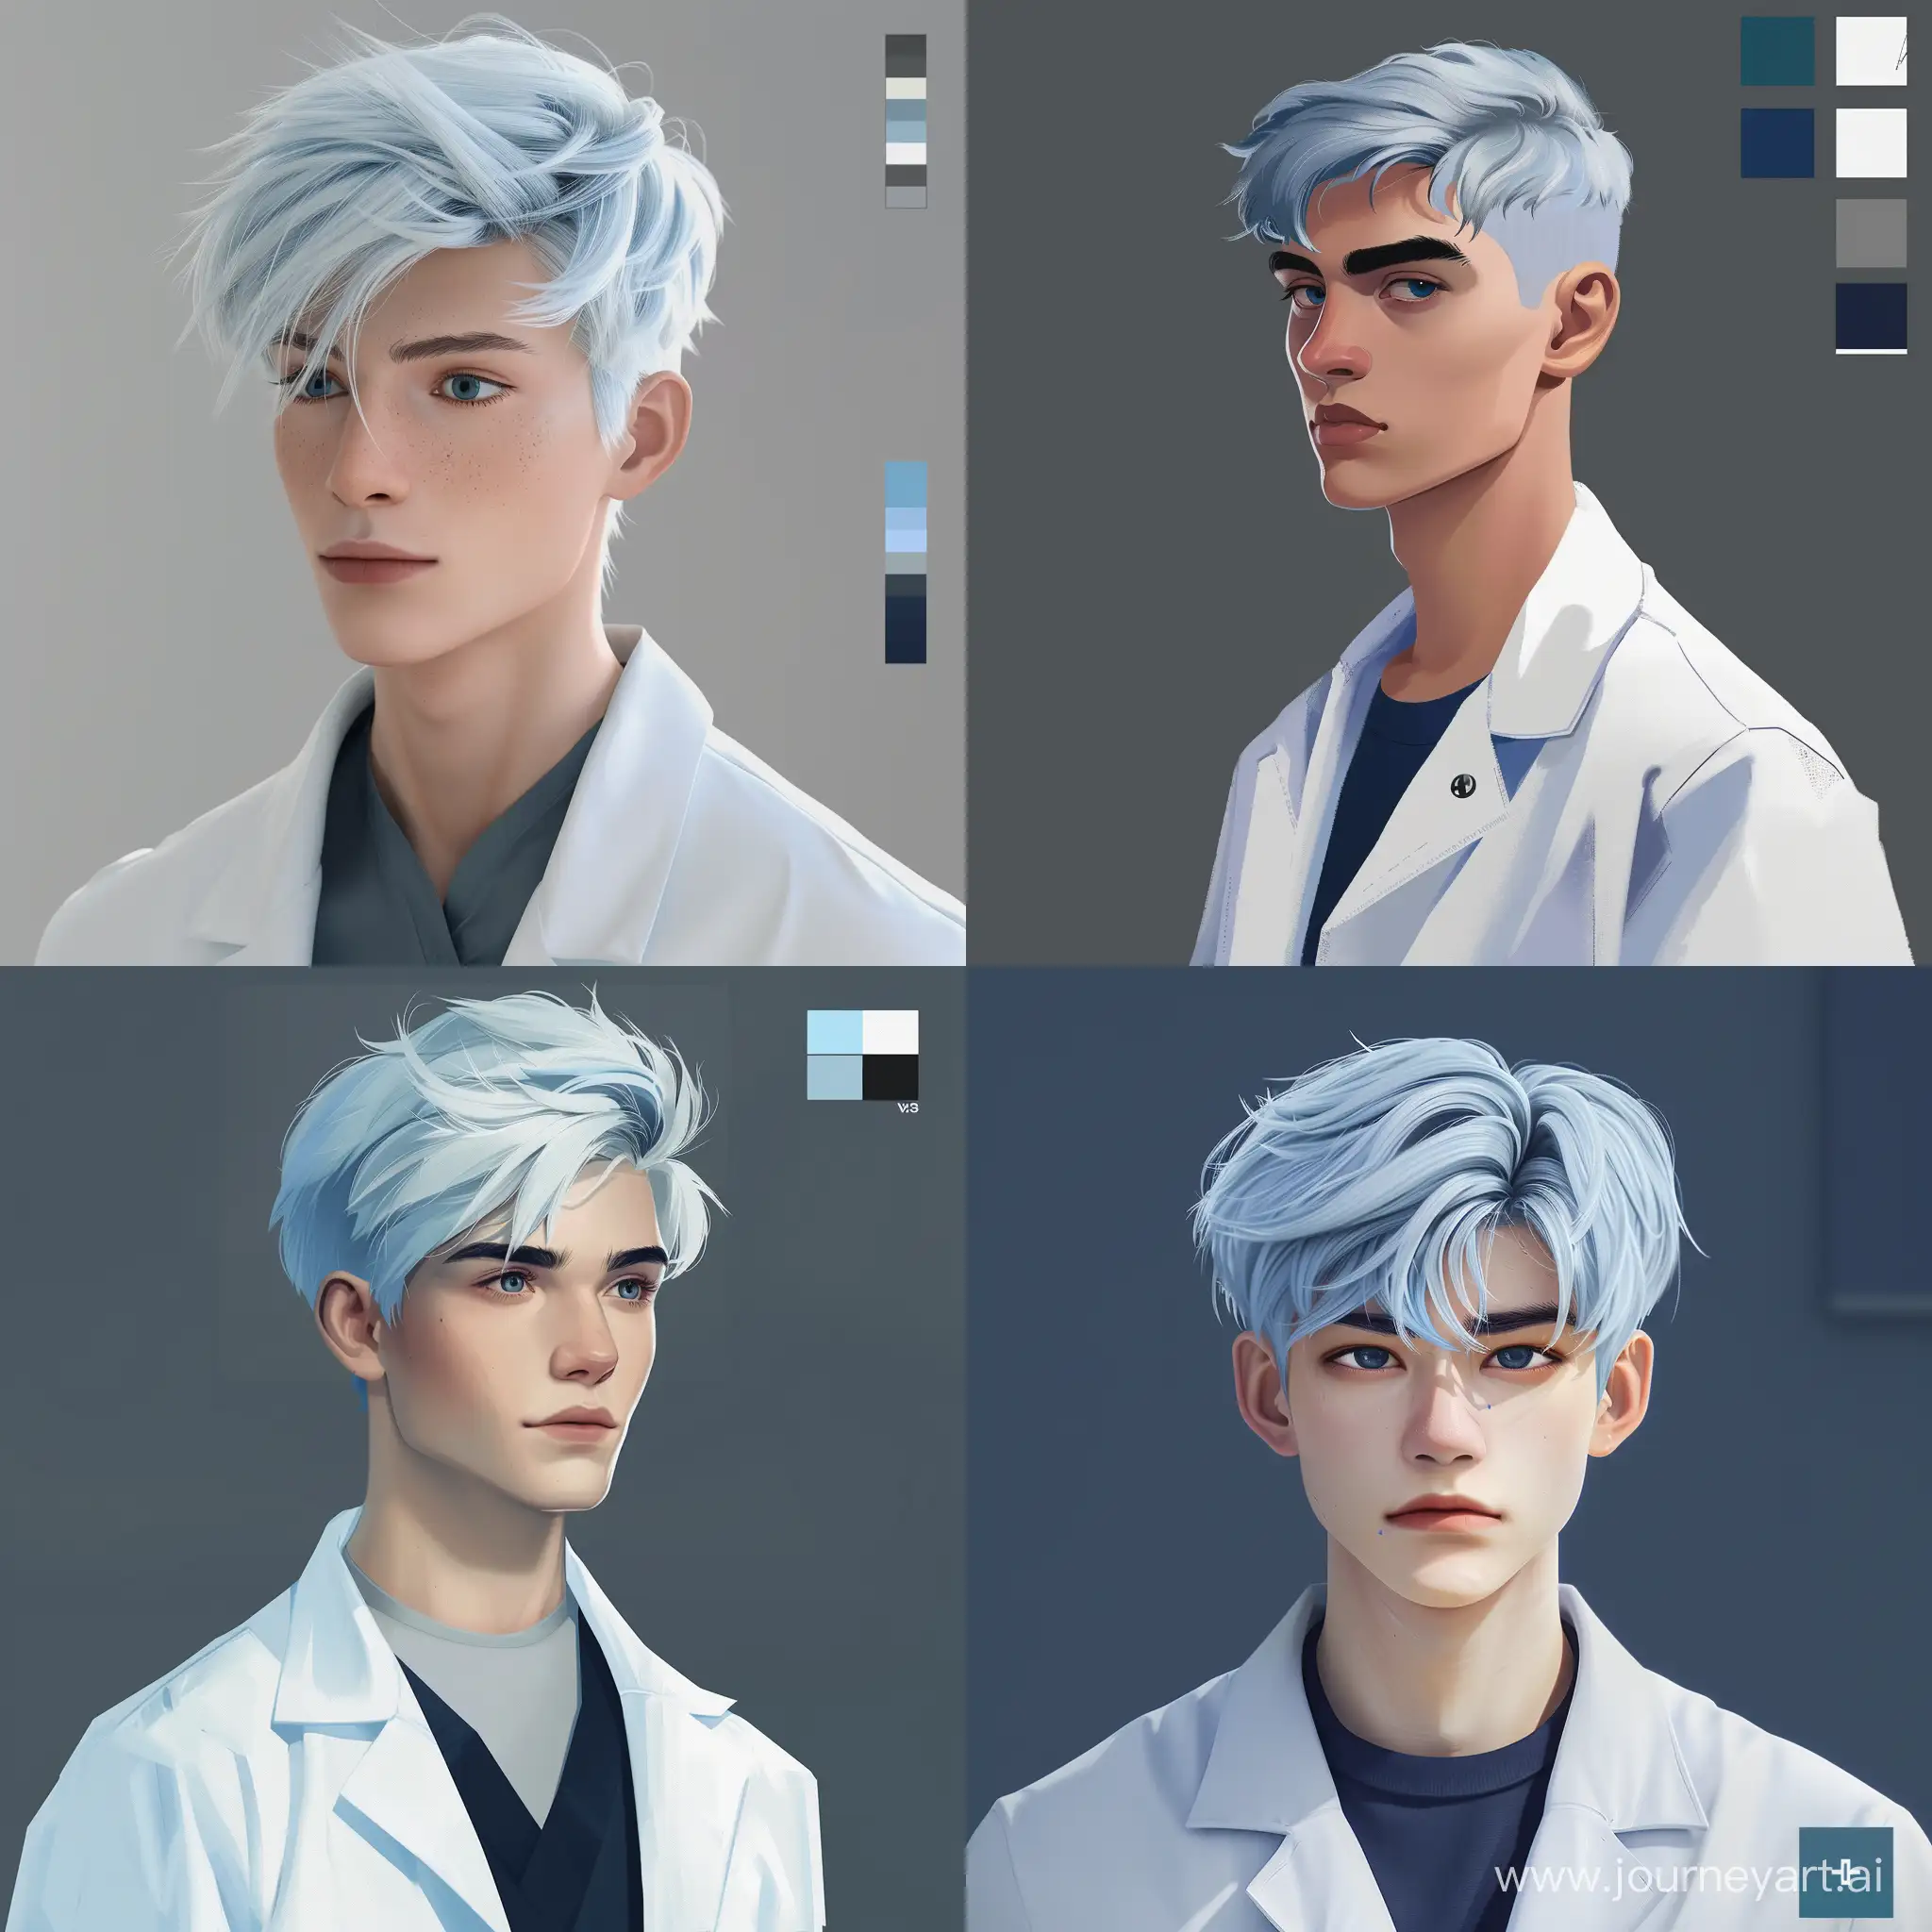 Realistic-Male-Vtuber-Avatar-with-Short-Light-Blue-Hair-and-Lab-Coat